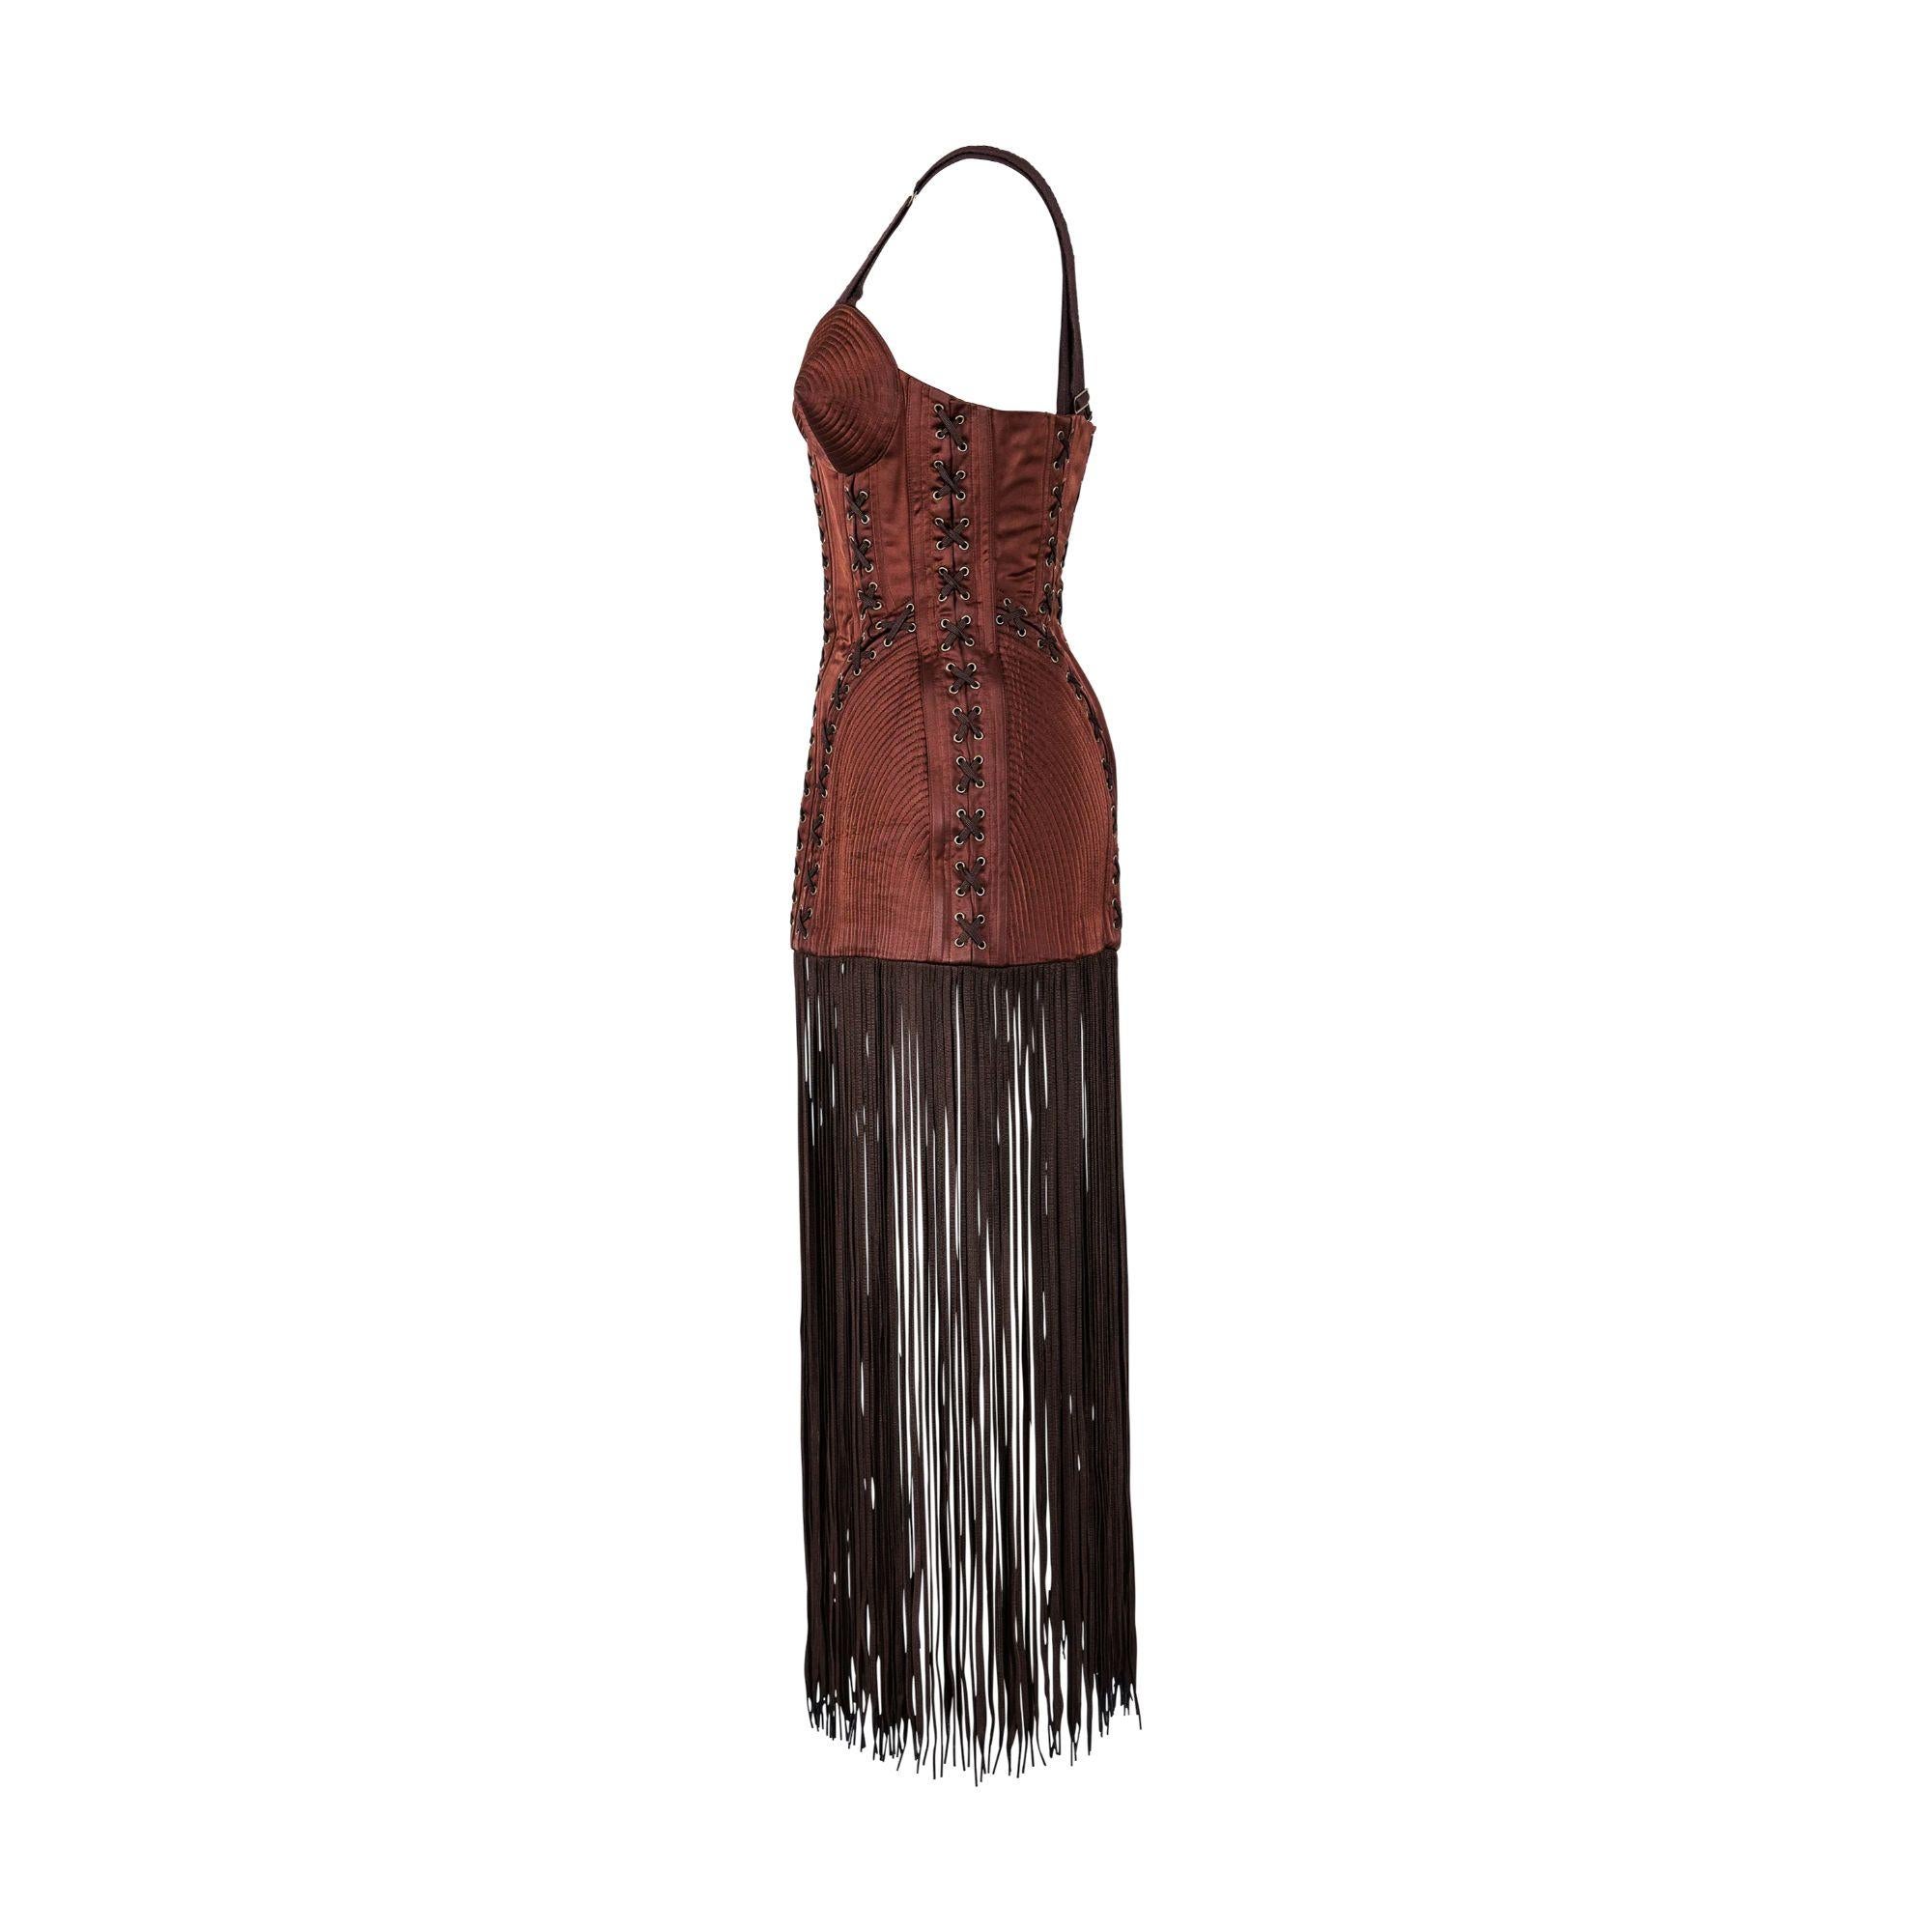 A/W 1990 Jean Paul Gaultier brown cone bra corset dress with shoestring fringe, created for Madonna's 'Blonde Ambition World Tour' and similar featured on the runway. A super rare piece. Fitted corset with adjustable length straps, boning, and